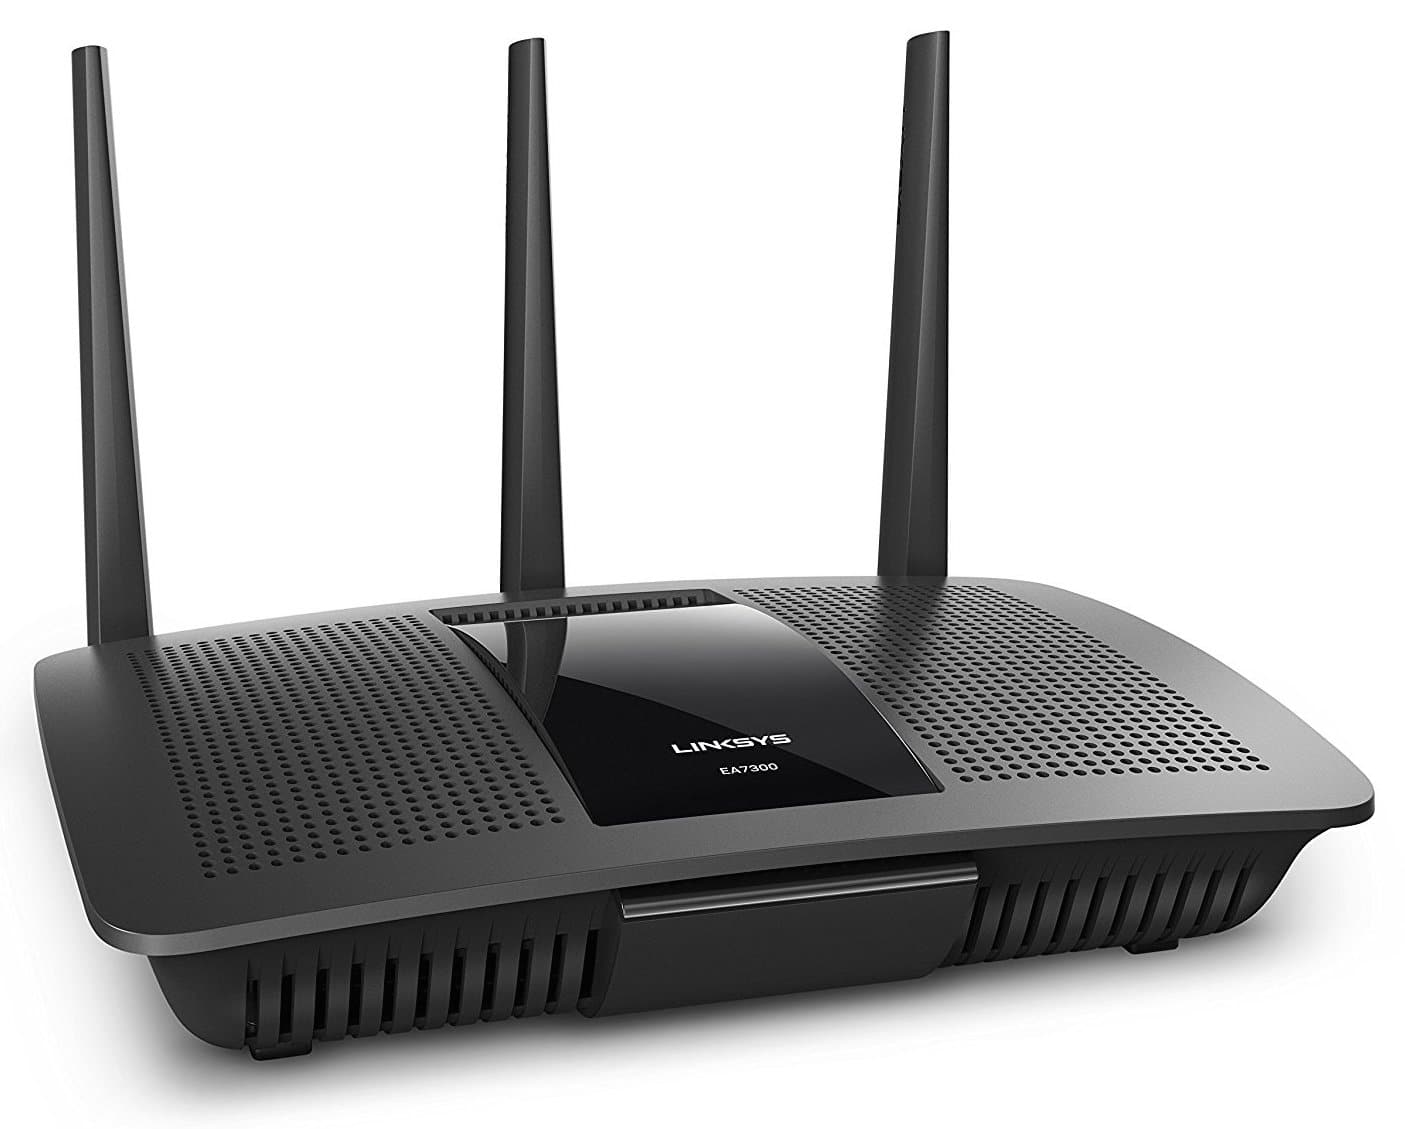 10 Best Wireless Router Reviews 2018 - Smart Routers for Gaming